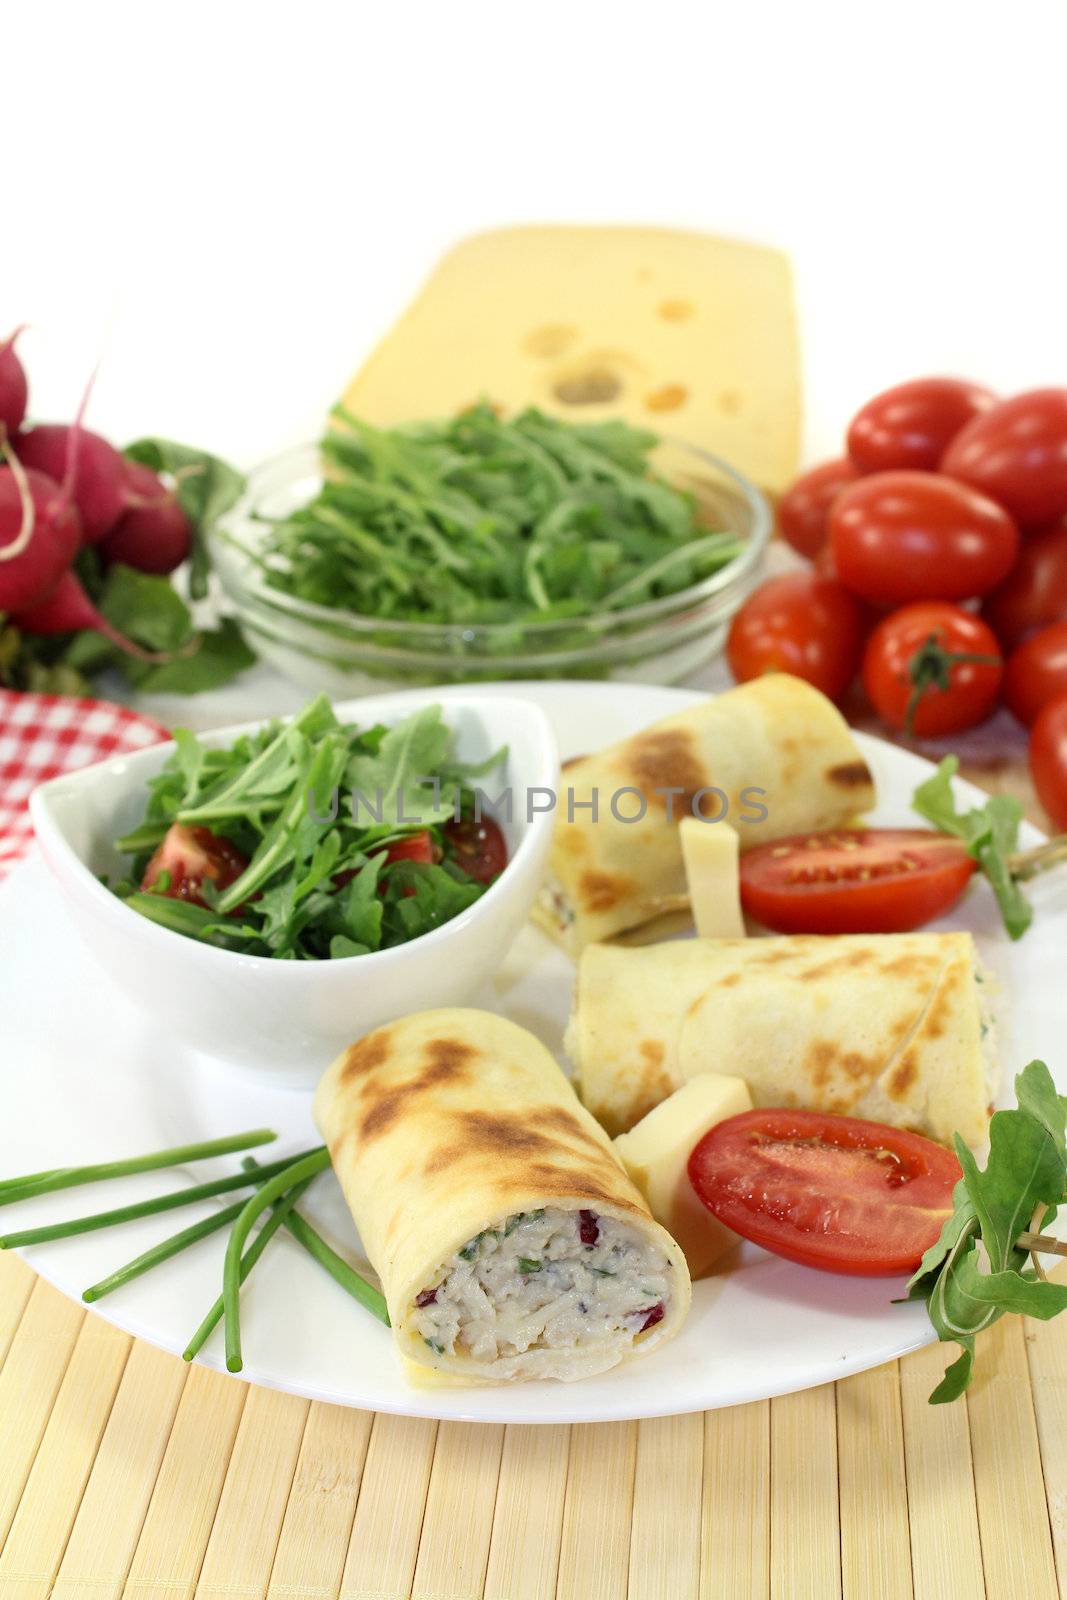 a crepe stuffed with cheese, radishes and chives